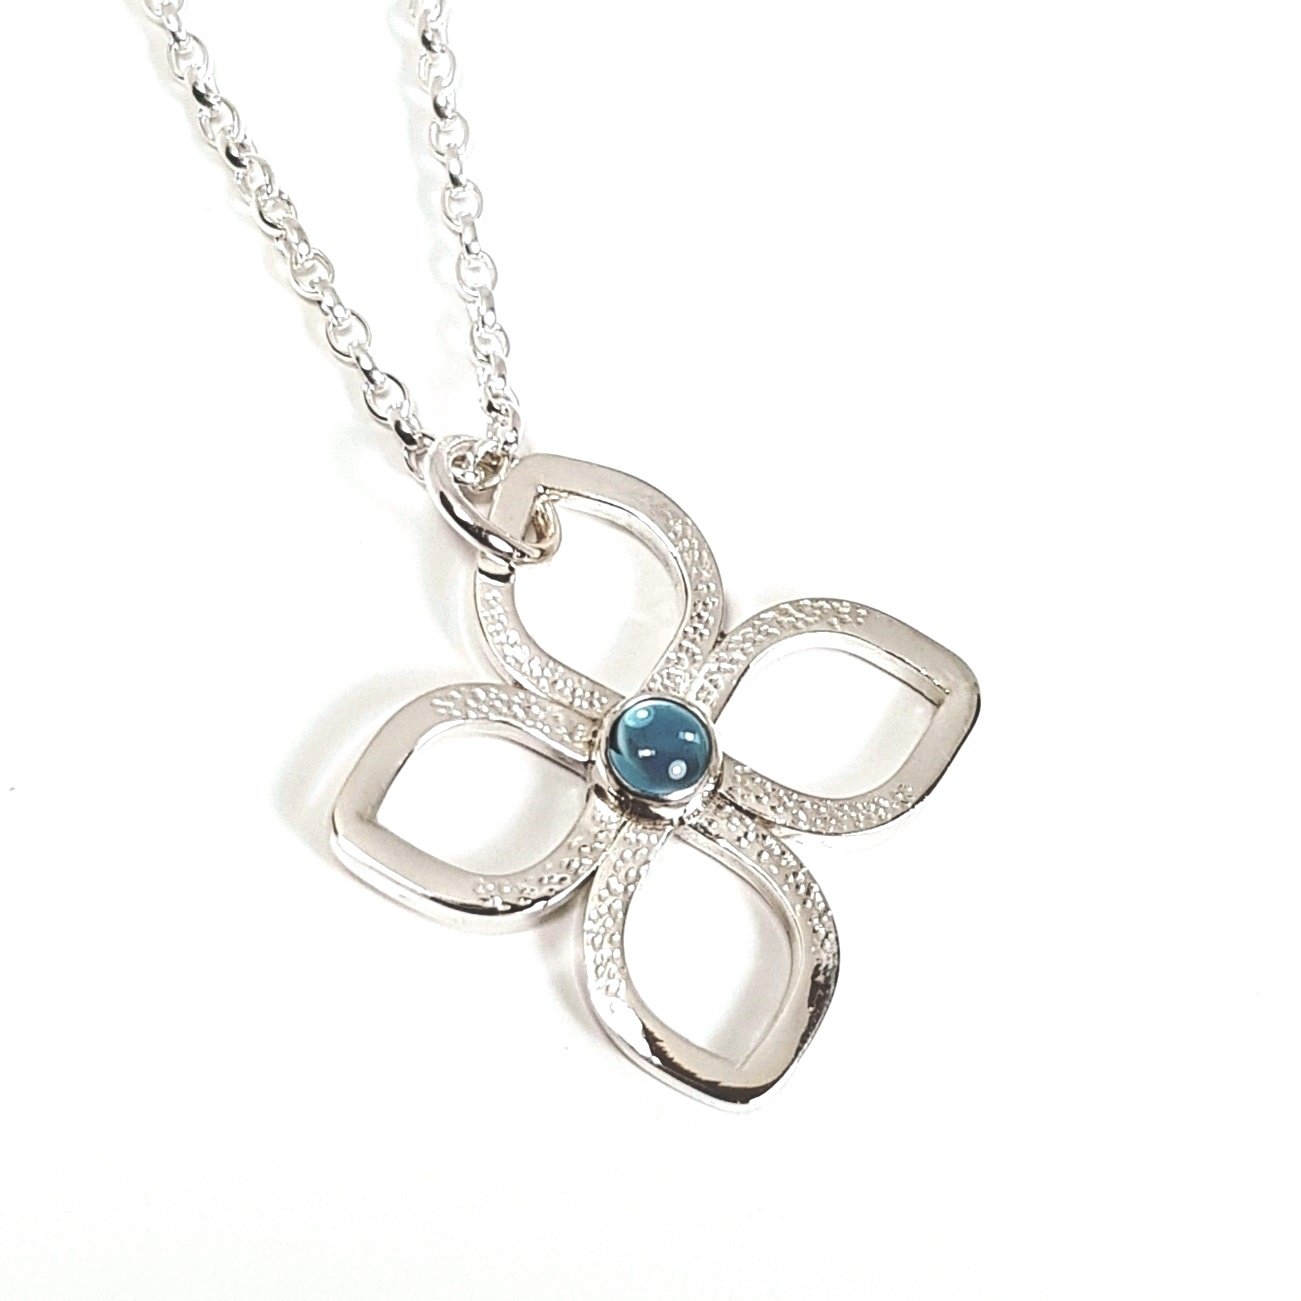 Silver Necklace November Birthstone Sterling Silver and Blue Topaz Flower Pendant